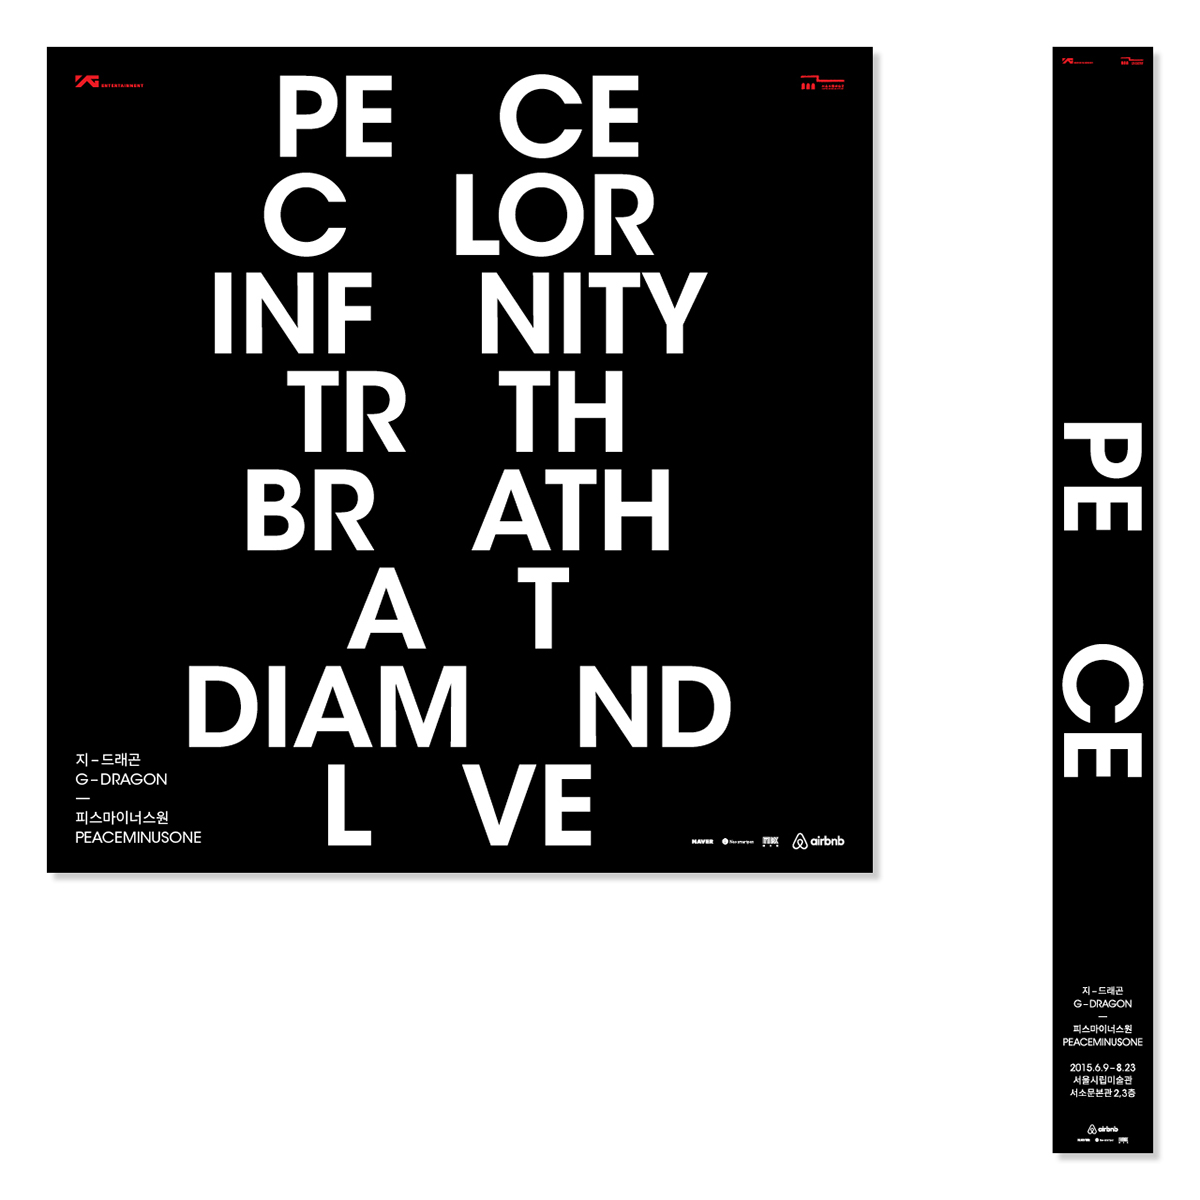 PEACEMINUSONE by G-Dragon on Behance